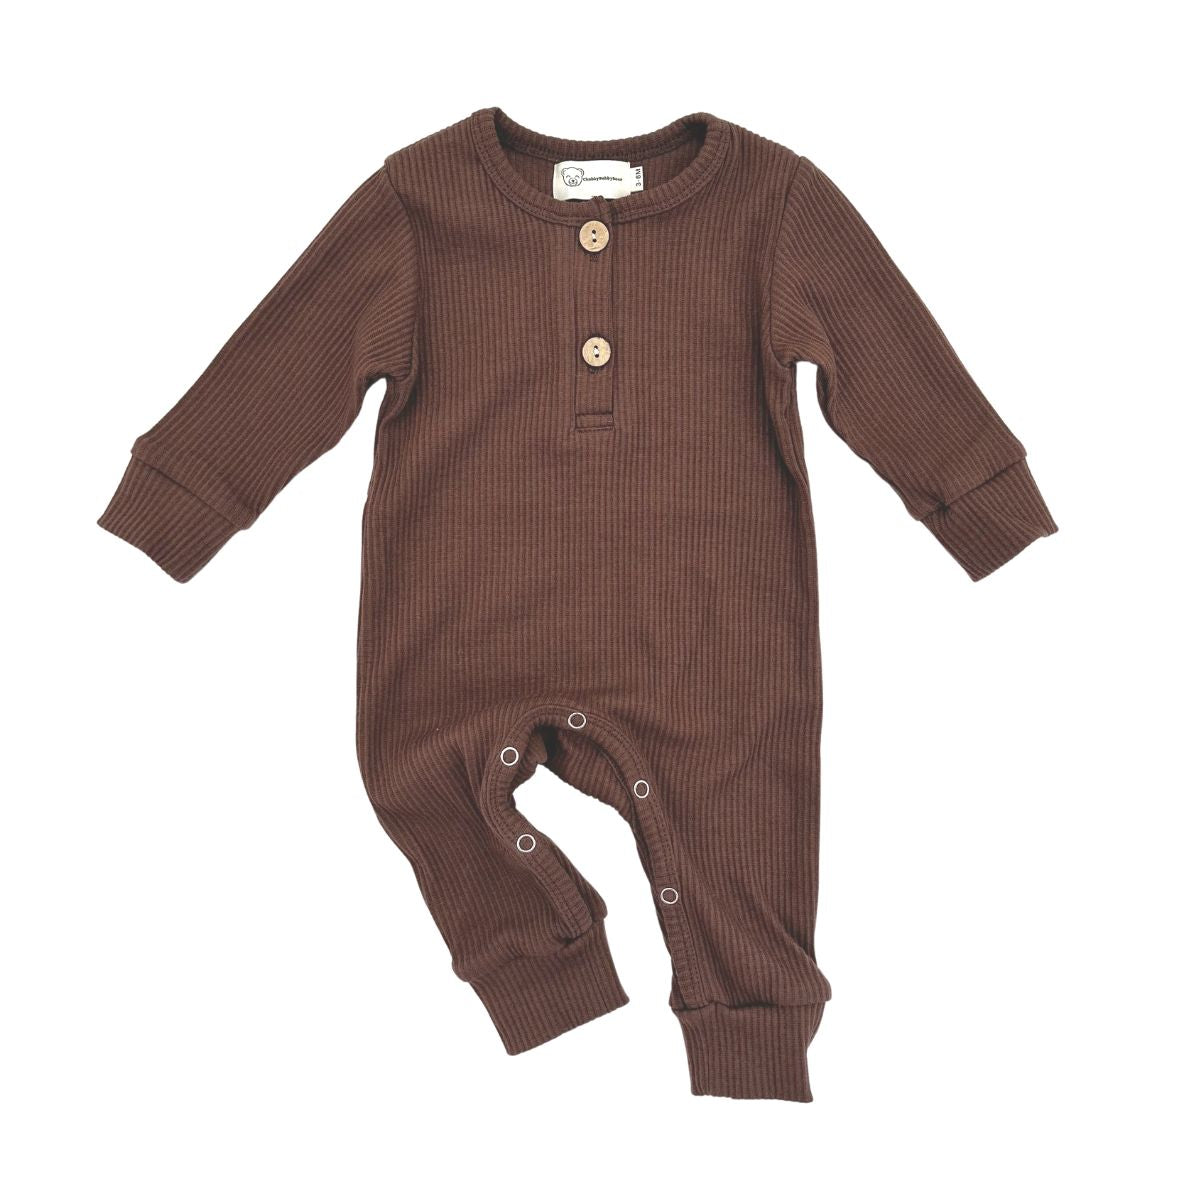 Ribbed thermal romper in coffee